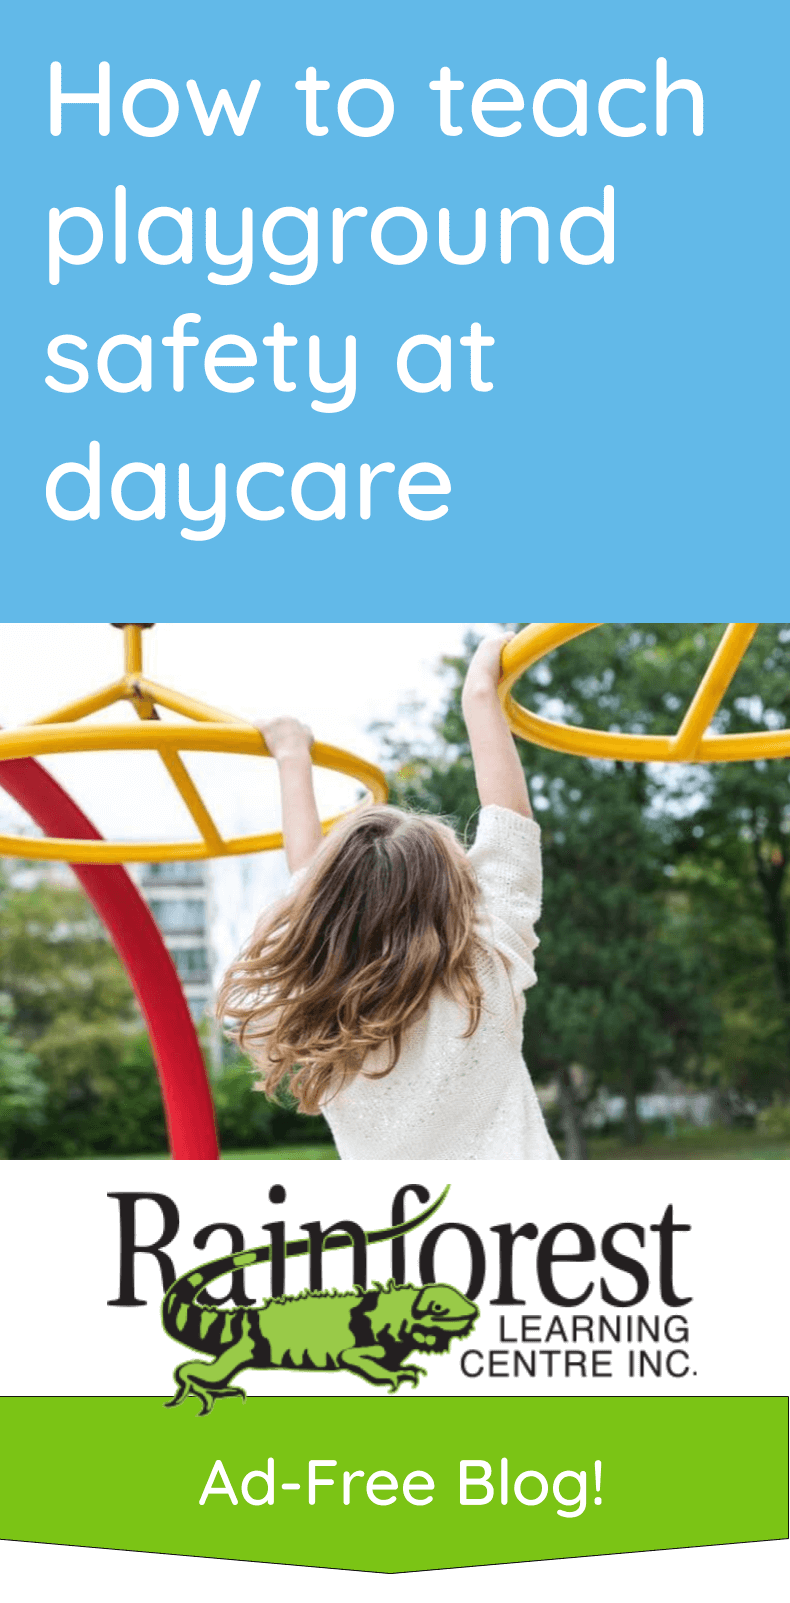 How to teach playground safety at daycare - article pinterest image